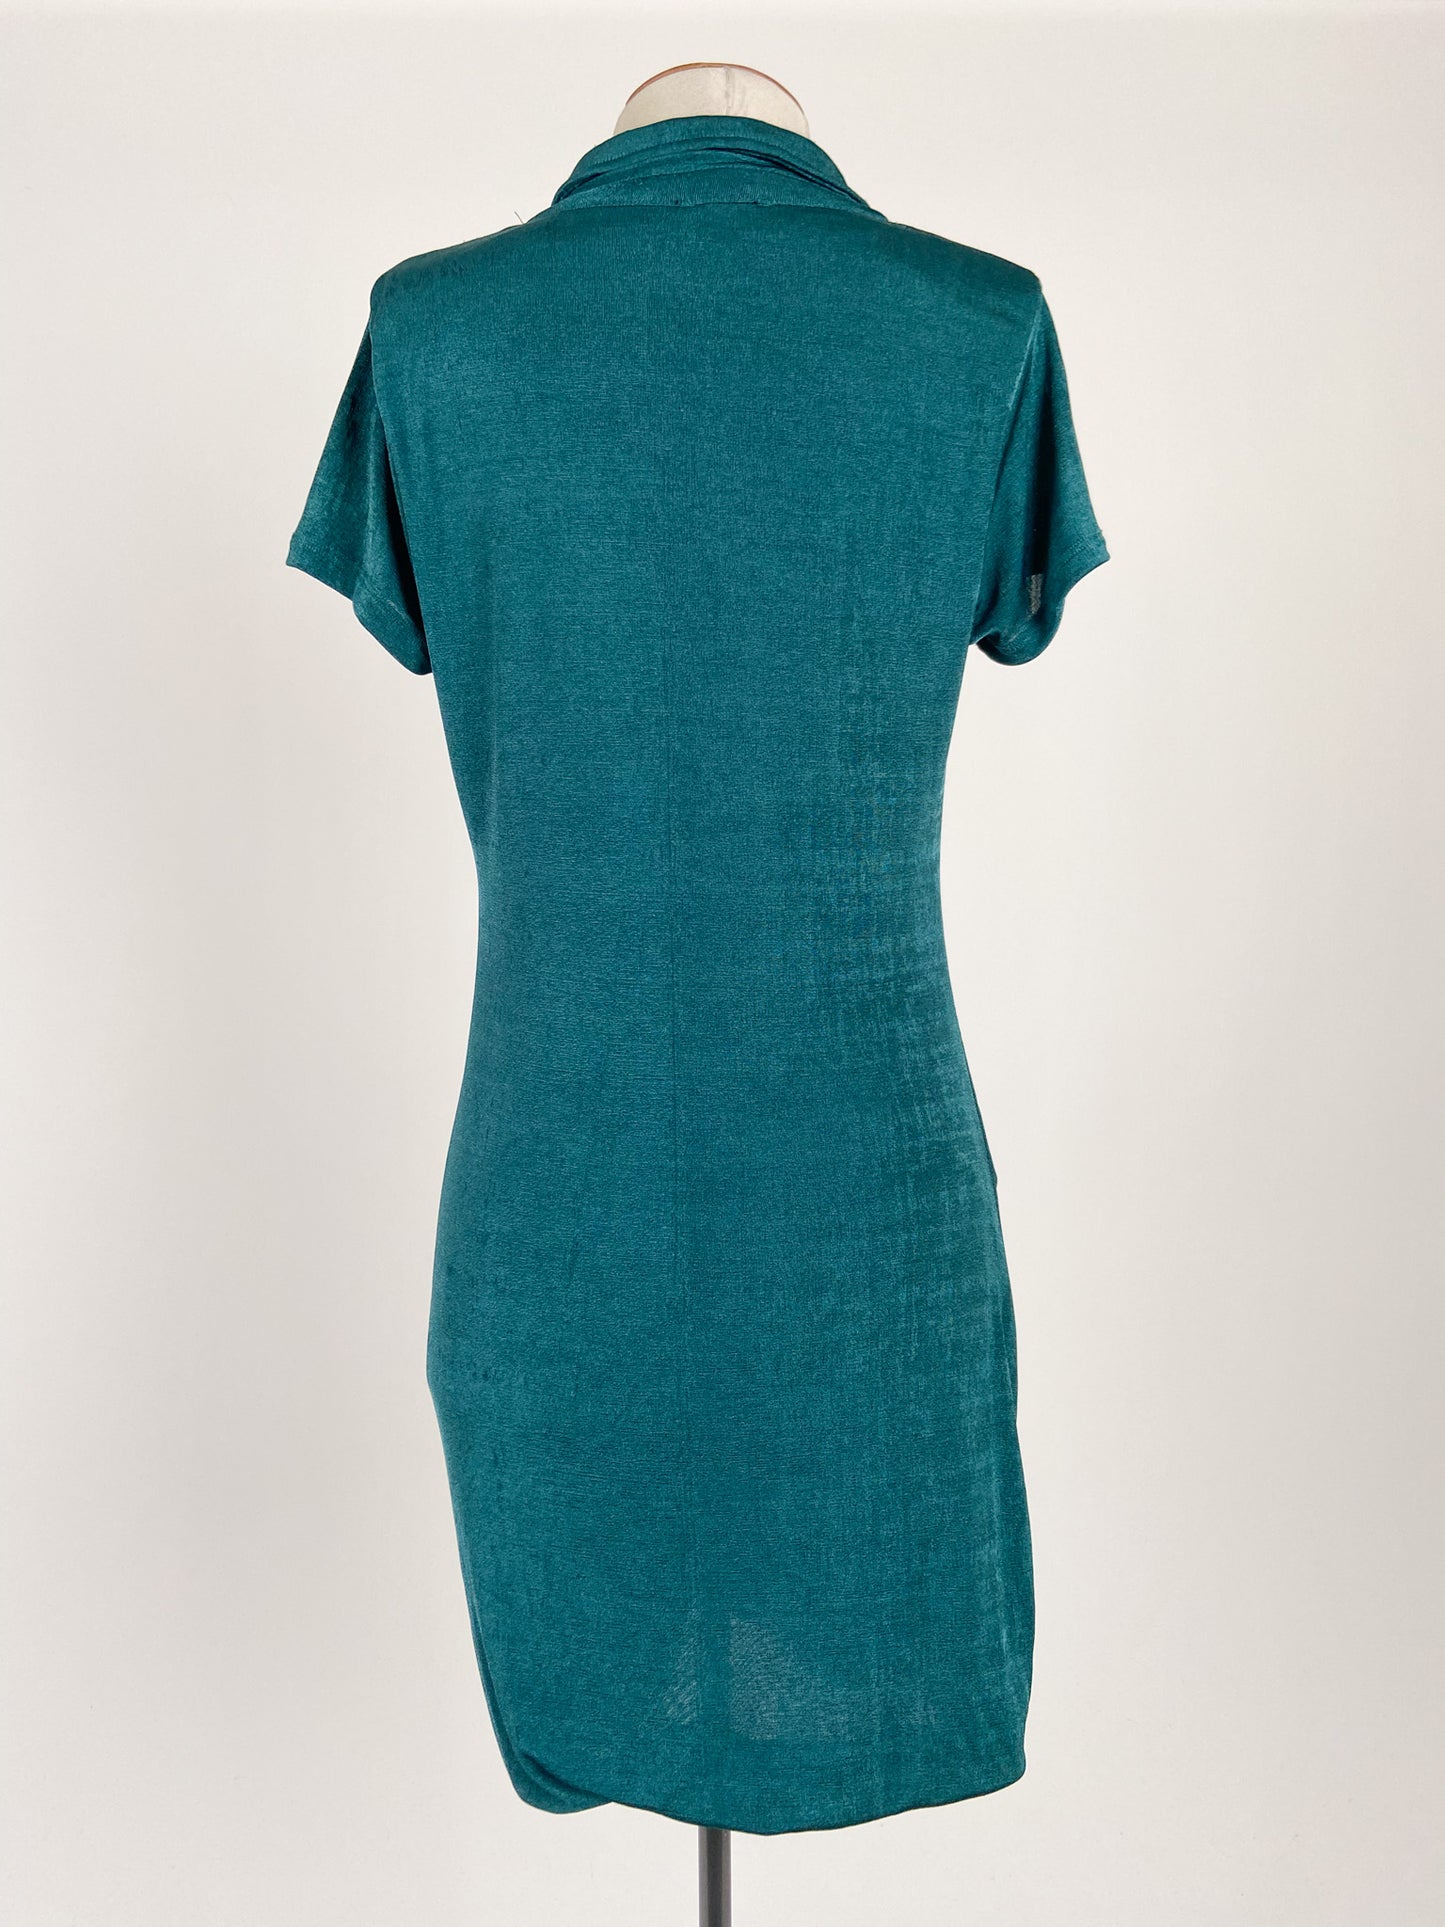 Dotti | Green Casual/Cocktail Dress | Size S